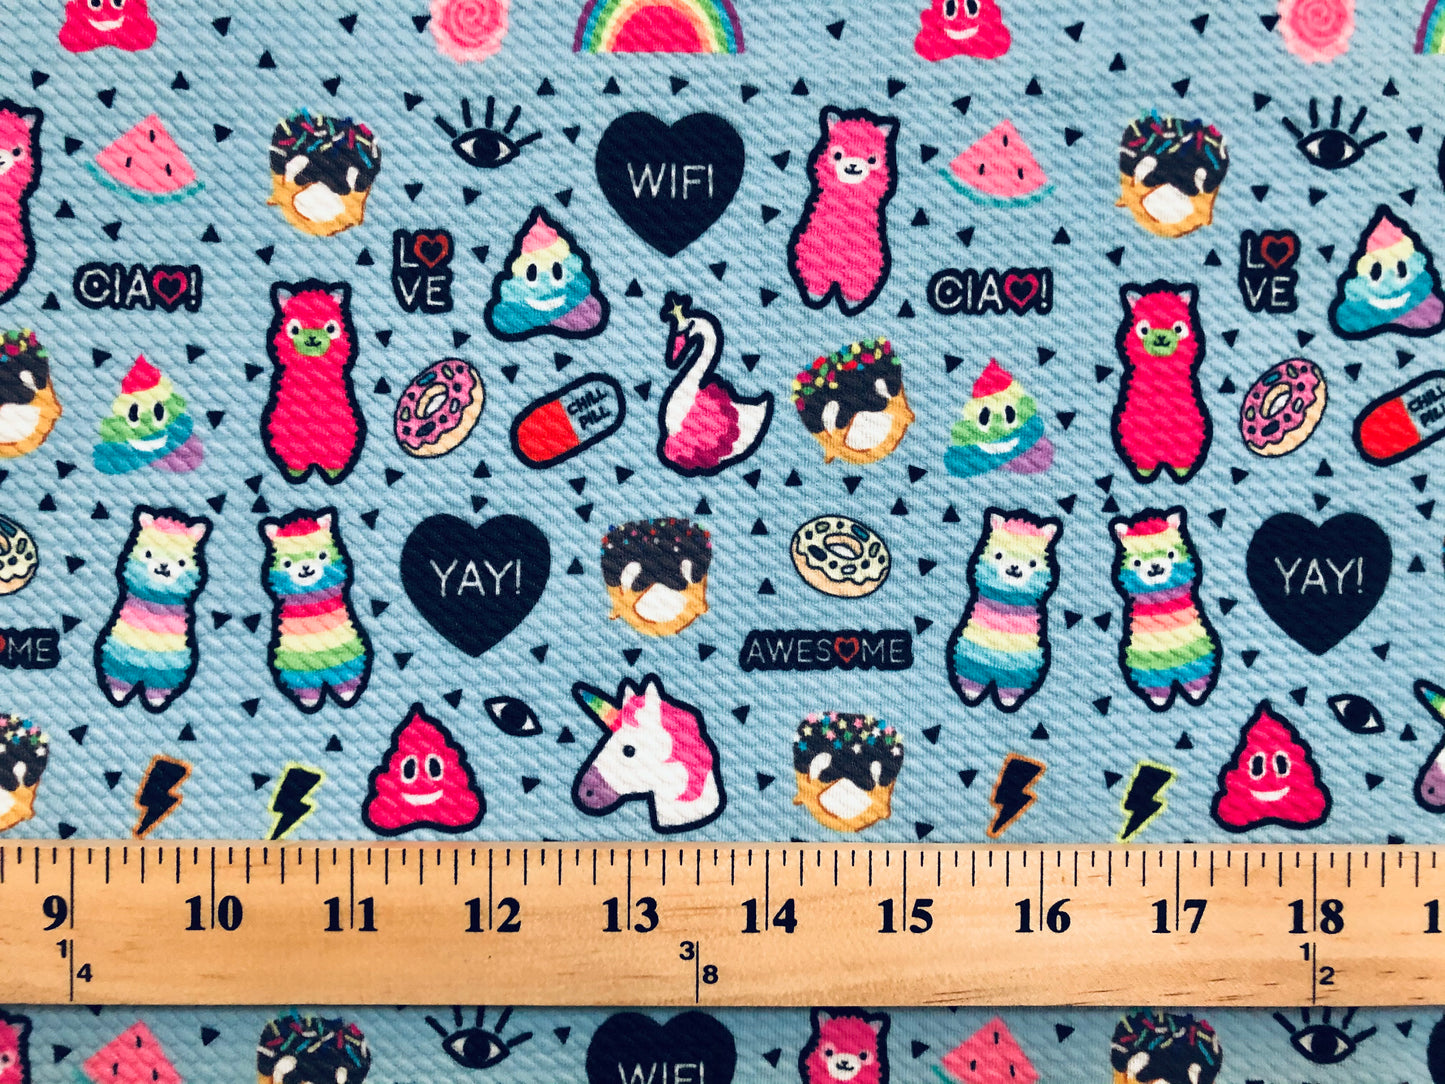 Bullet knit Printed Fabric-Blue Magenta Black Candy Party-BPR202-Sold by the Yard-Bulk Available